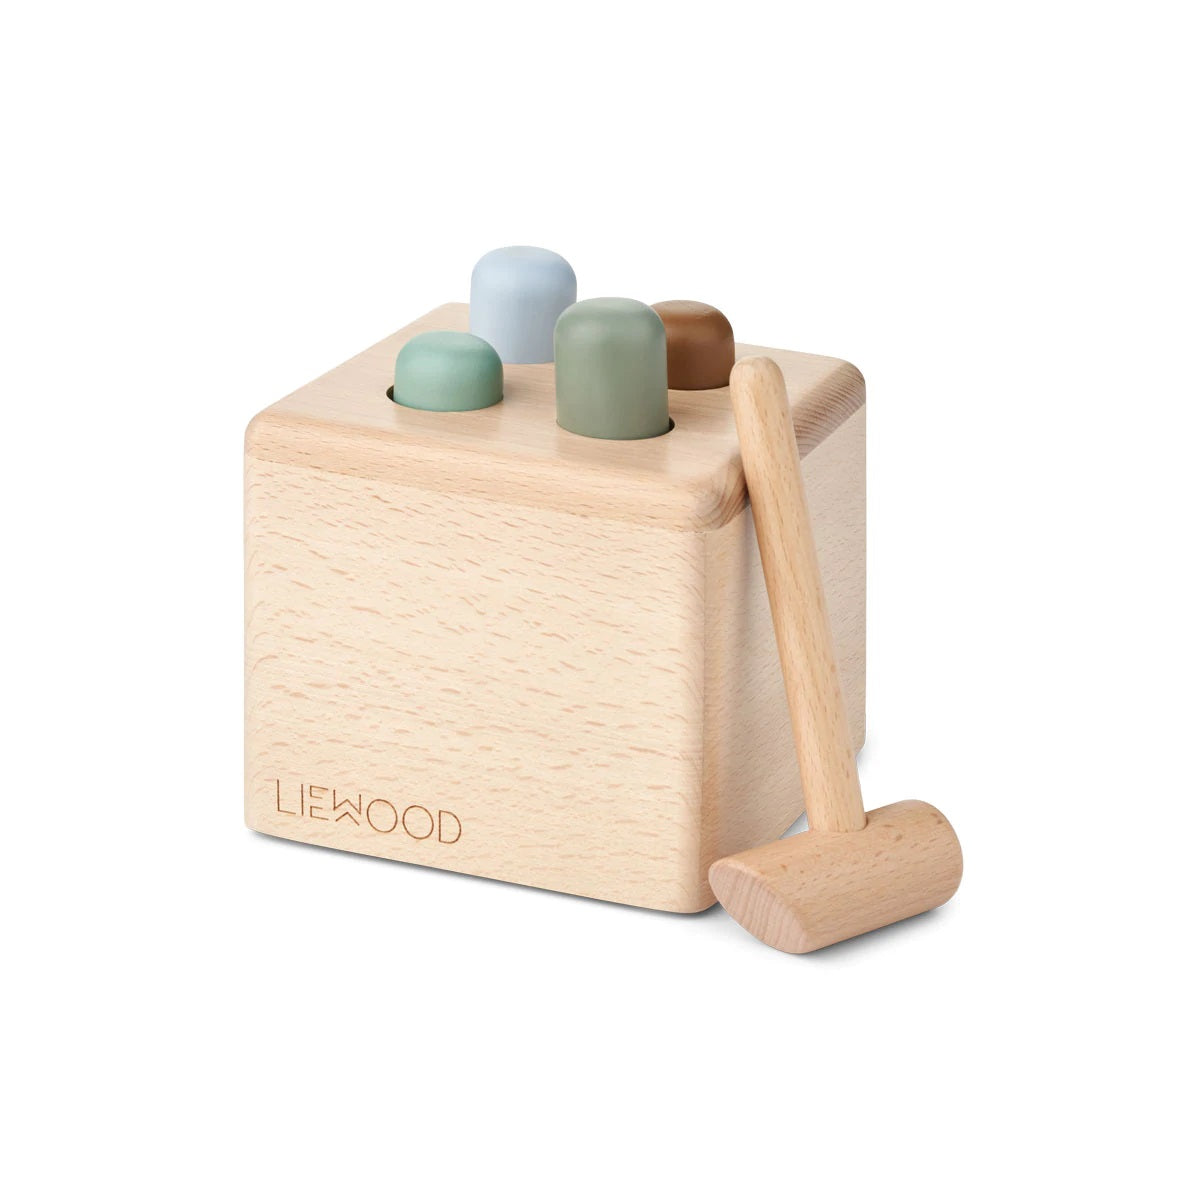 Liewood Kirk Wooden Hammer Toy - Blue Multi Mix